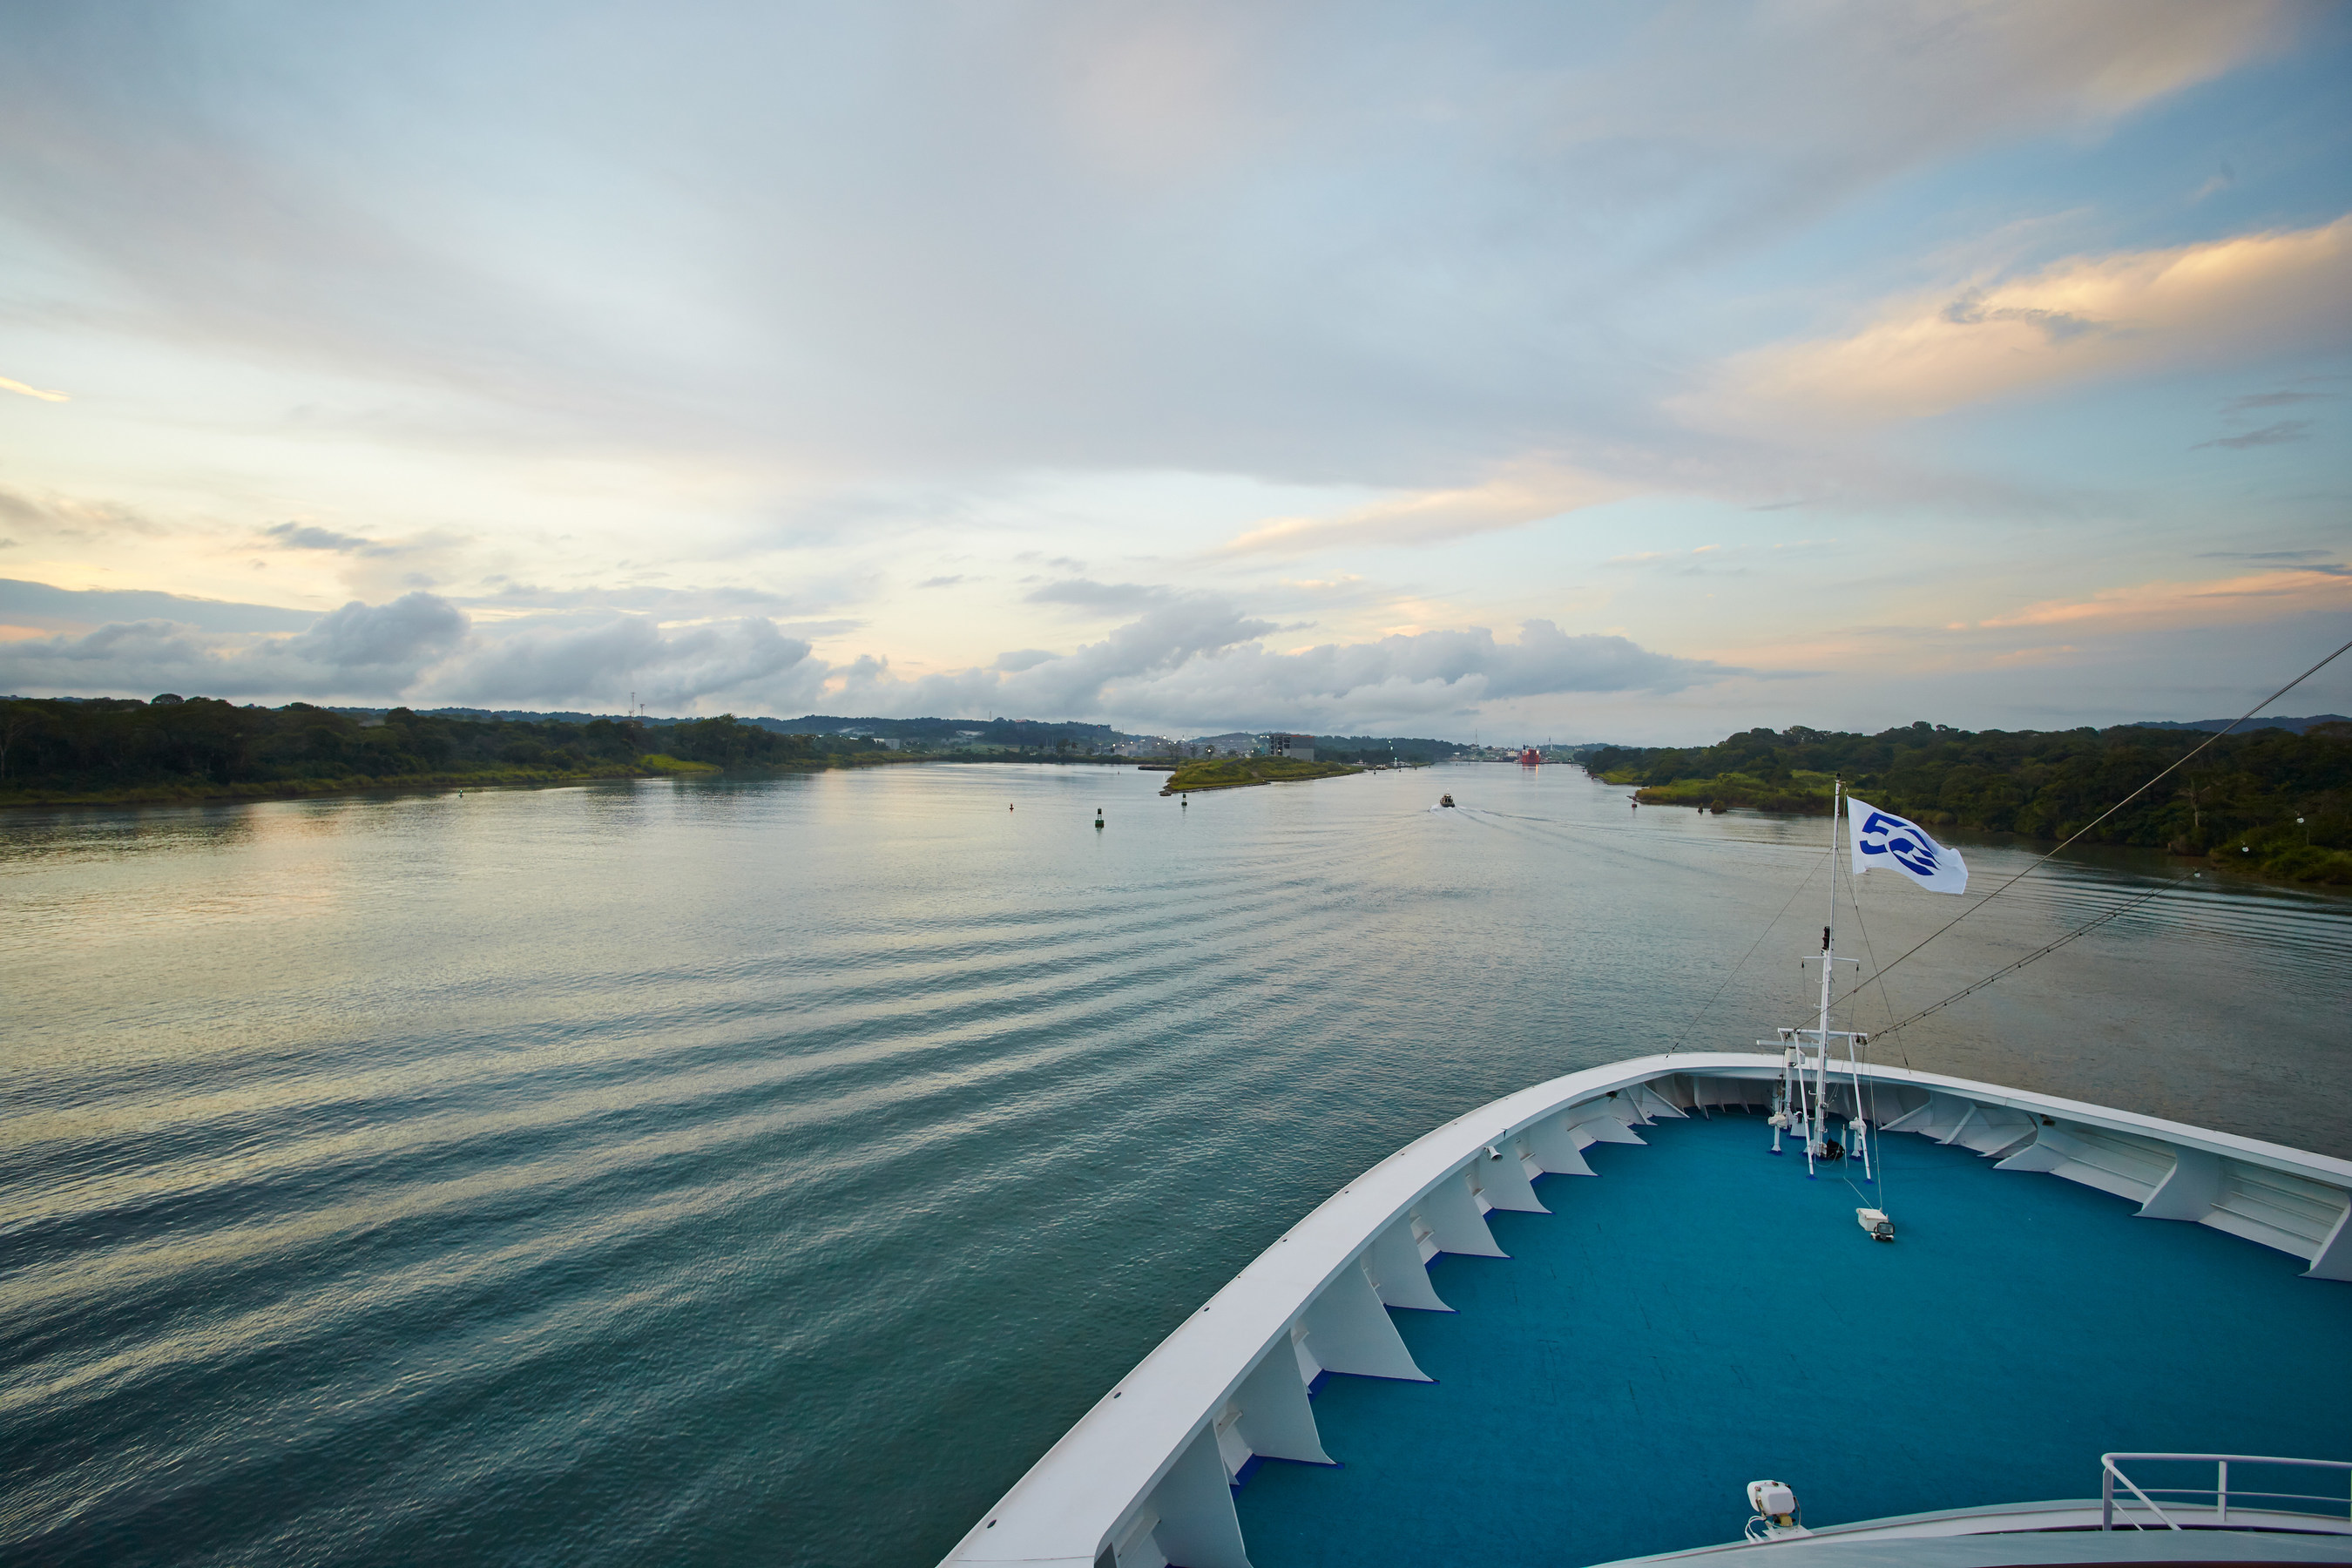 Cruise ship captains and their guests get a front row seat to amazing destinations including the Panama Canal. (Photo credit: Princess Cruises)